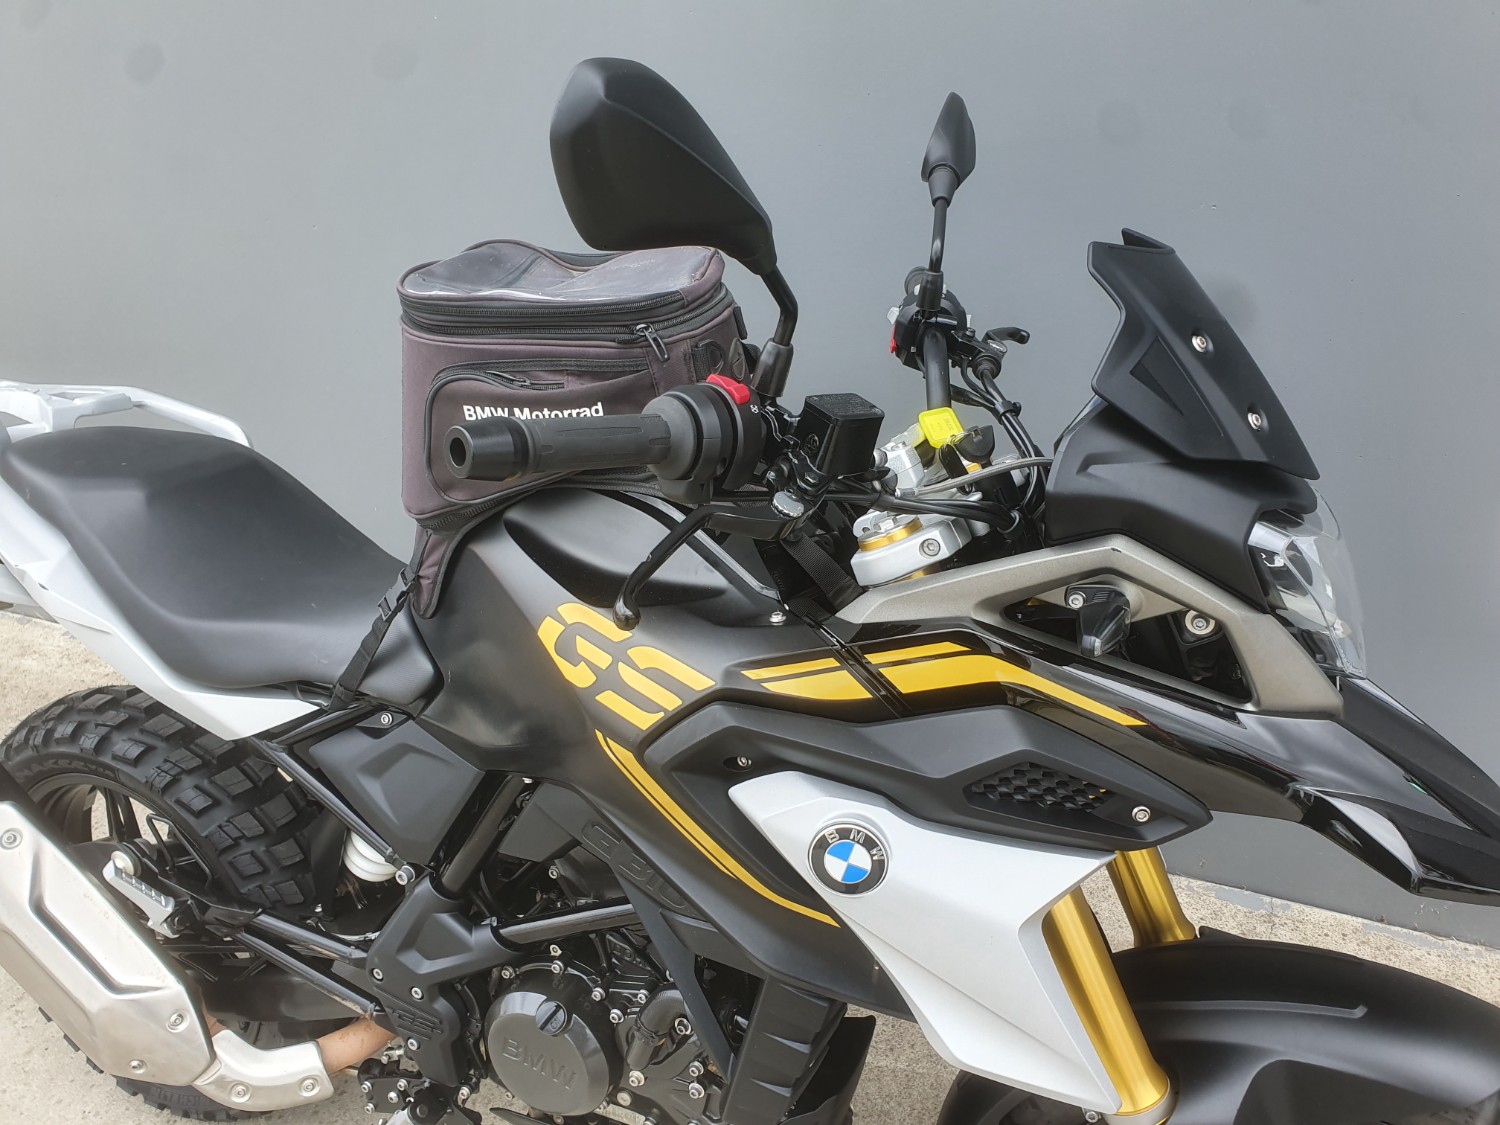 2021 BMW G 310 GS Motorcycle Image 7